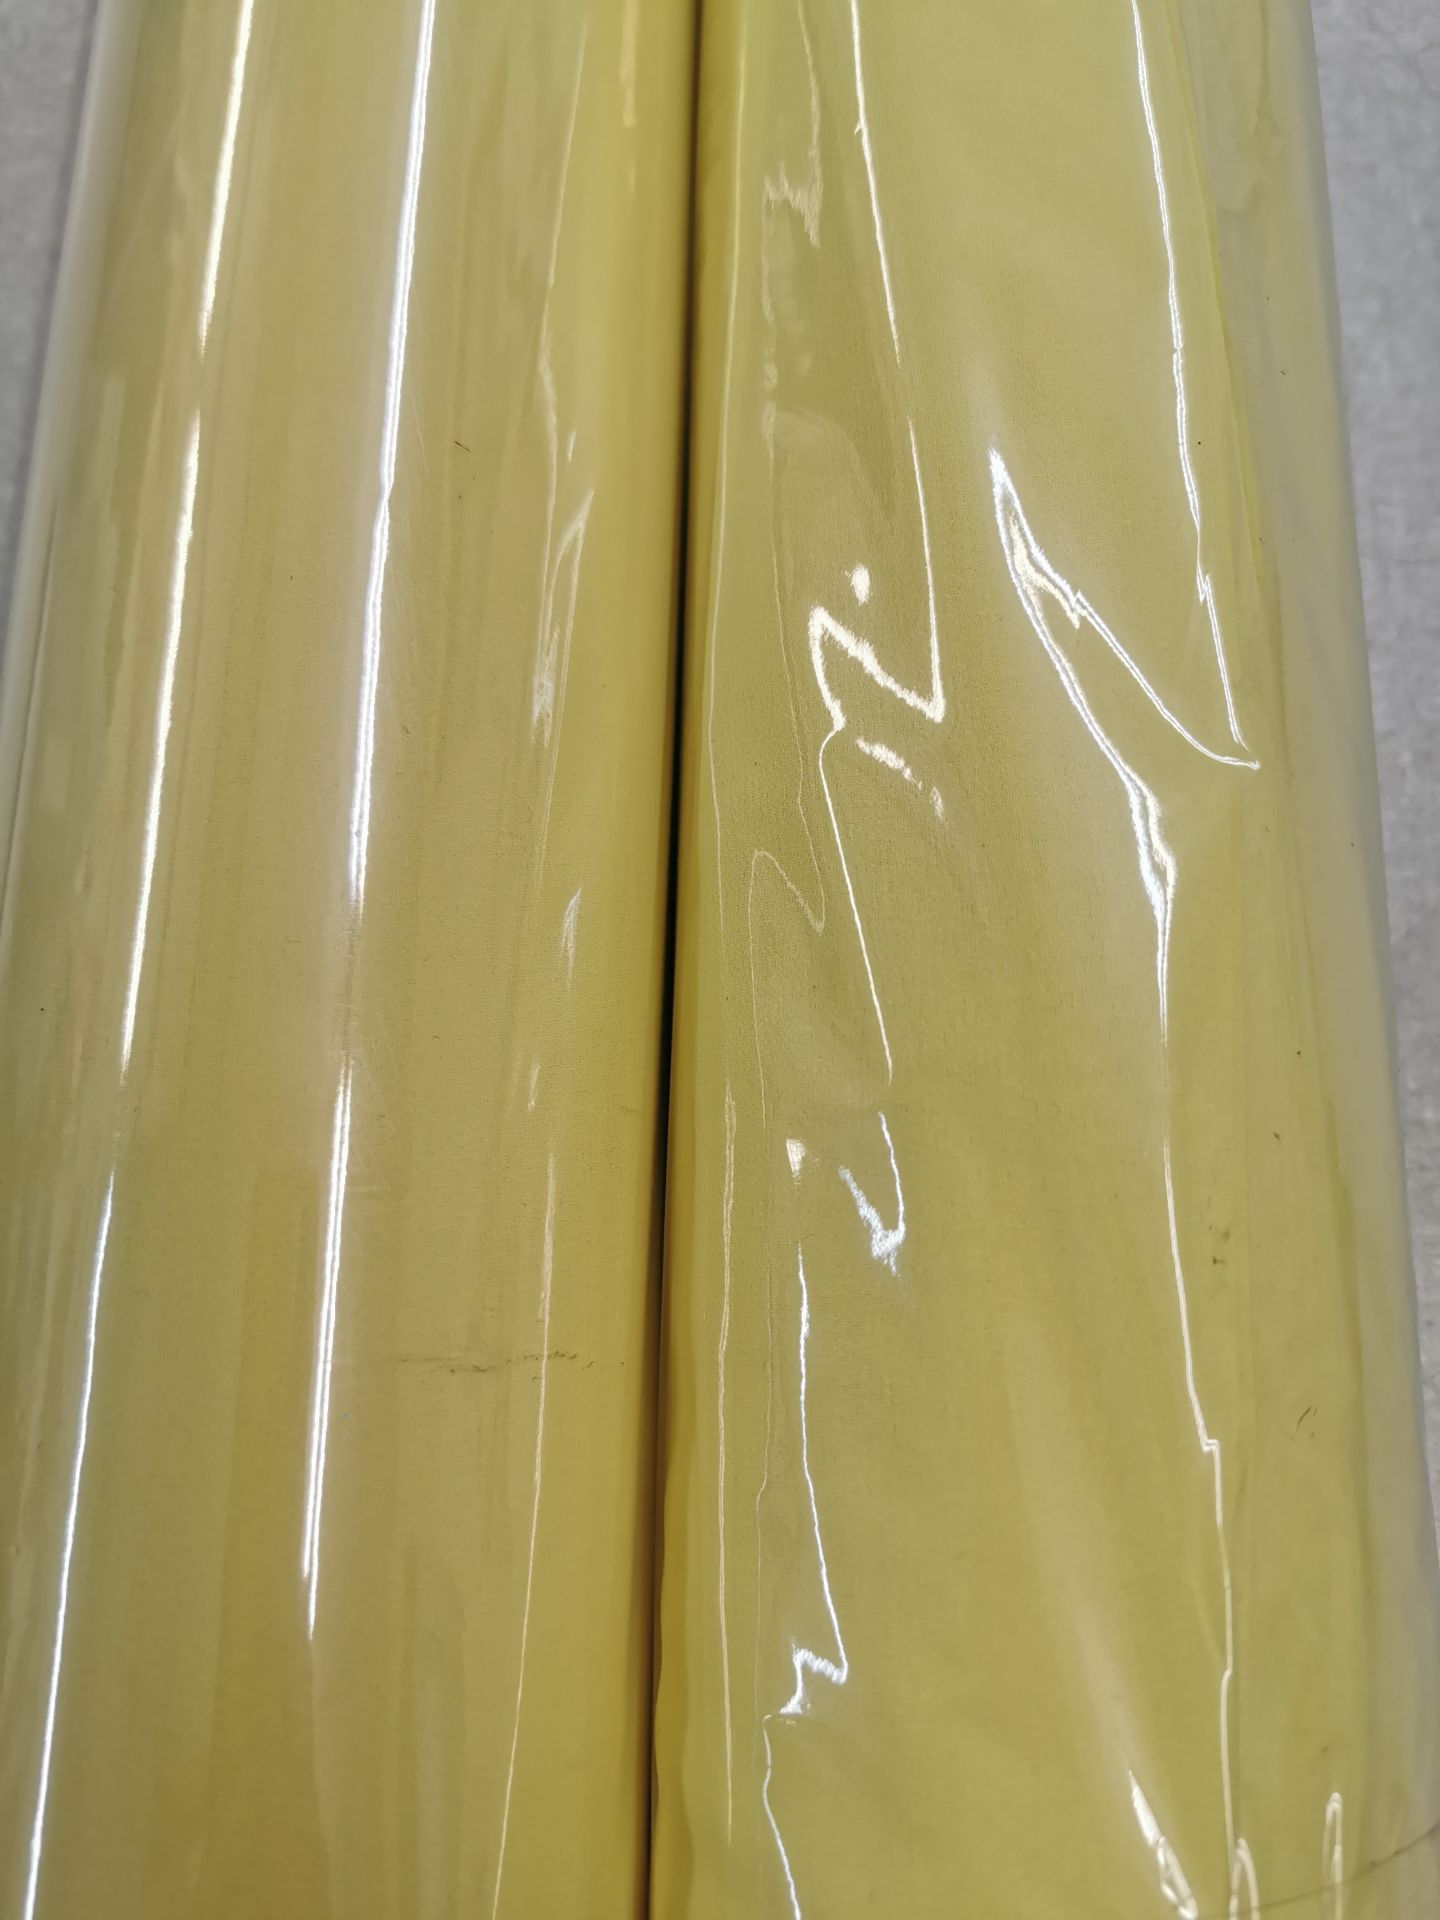 2 x New lemon coloured fabric rolls . Item No 171 . Estimated 50 linear meters - Image 3 of 3